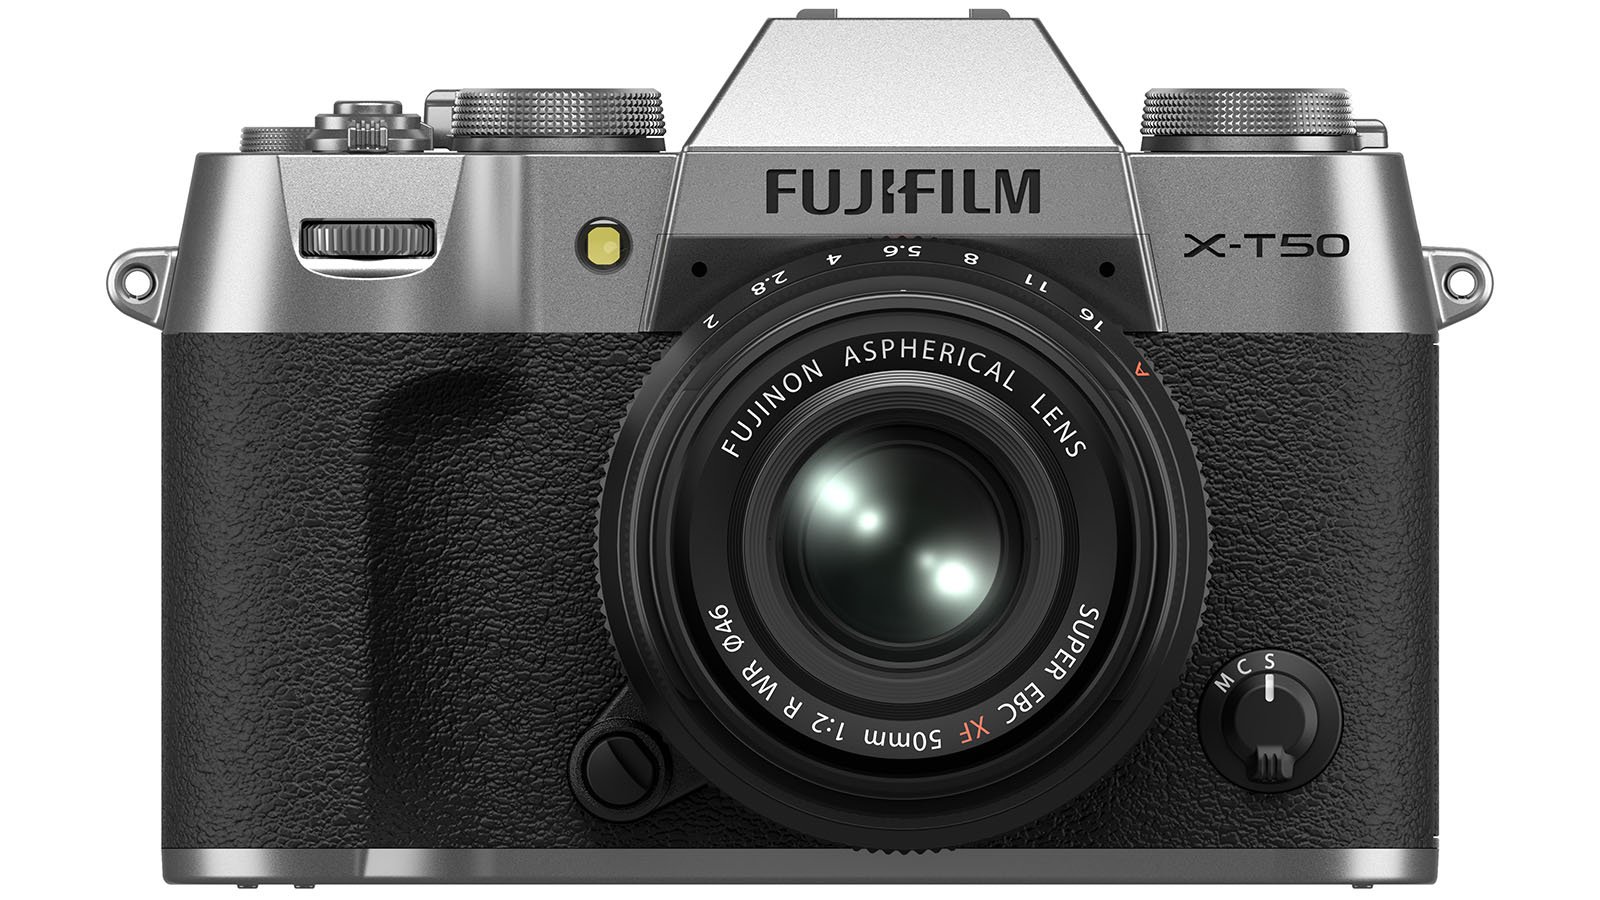 A silver and black Fujifilm X-T50 digital camera with a Fujinon Aspherical Lens is shown from the front. The camera features various buttons and dials for settings, and the lens has detailed markings and a bright reflective surface.